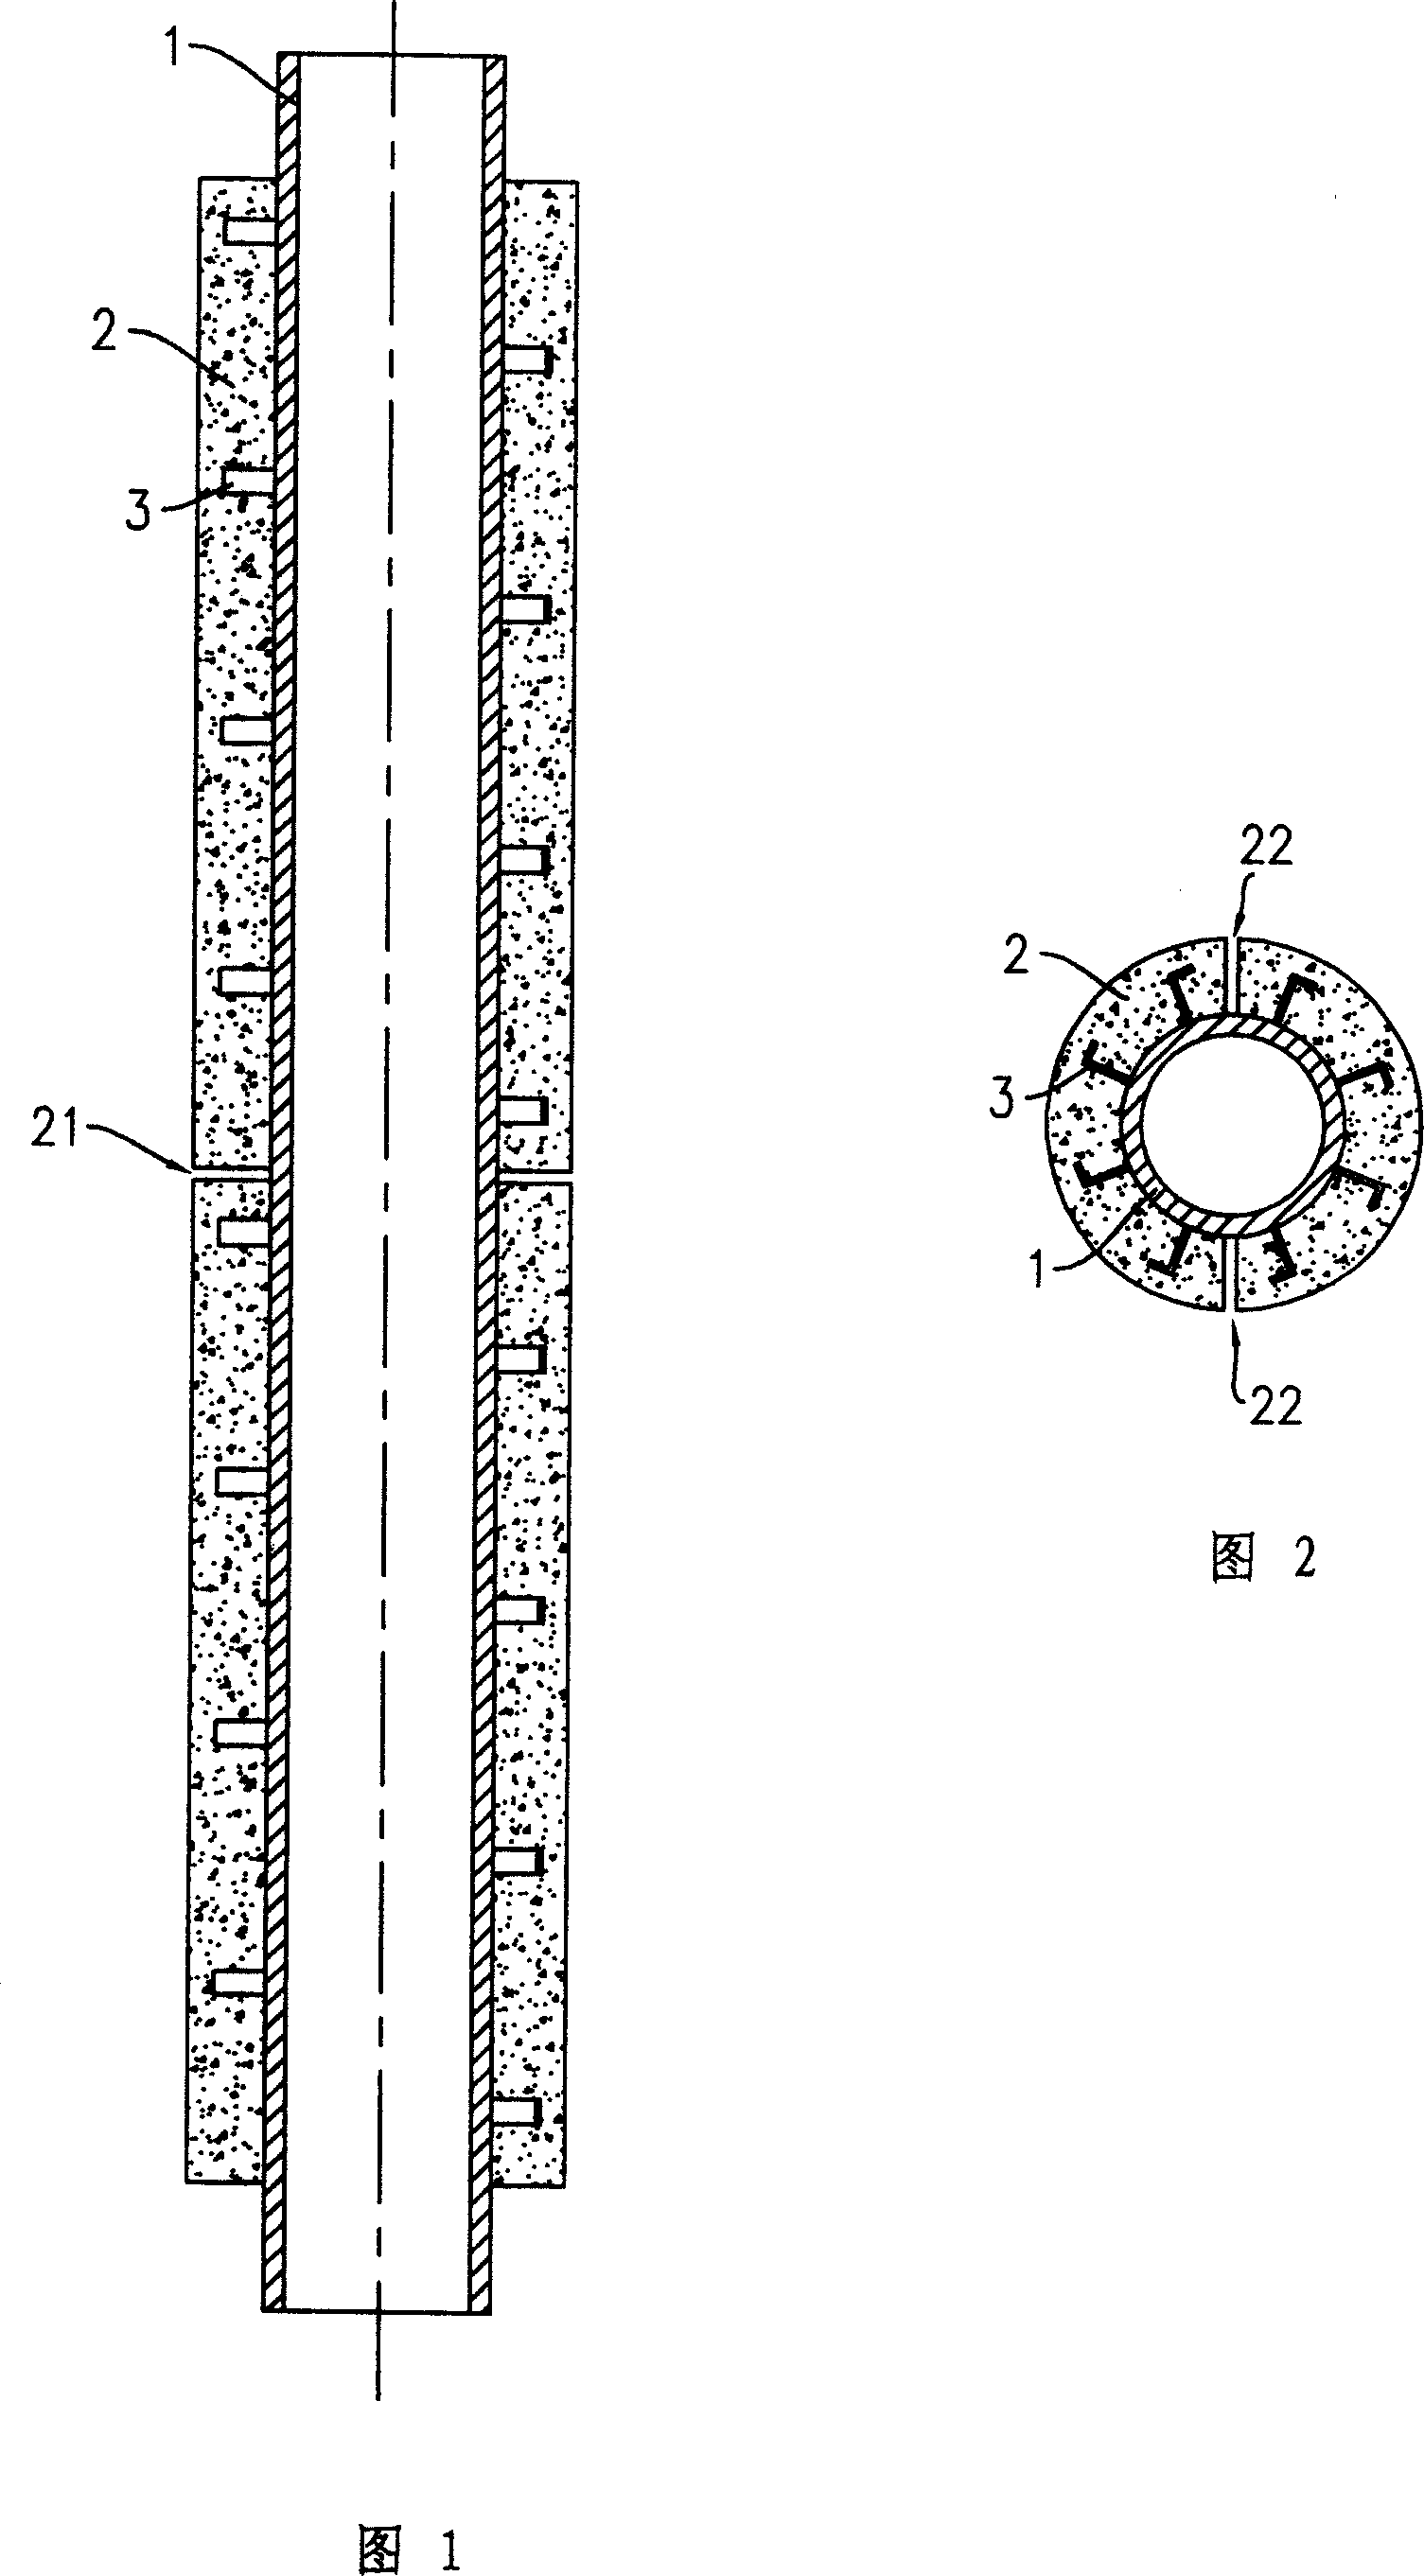 Recuperator tube device used for boiler